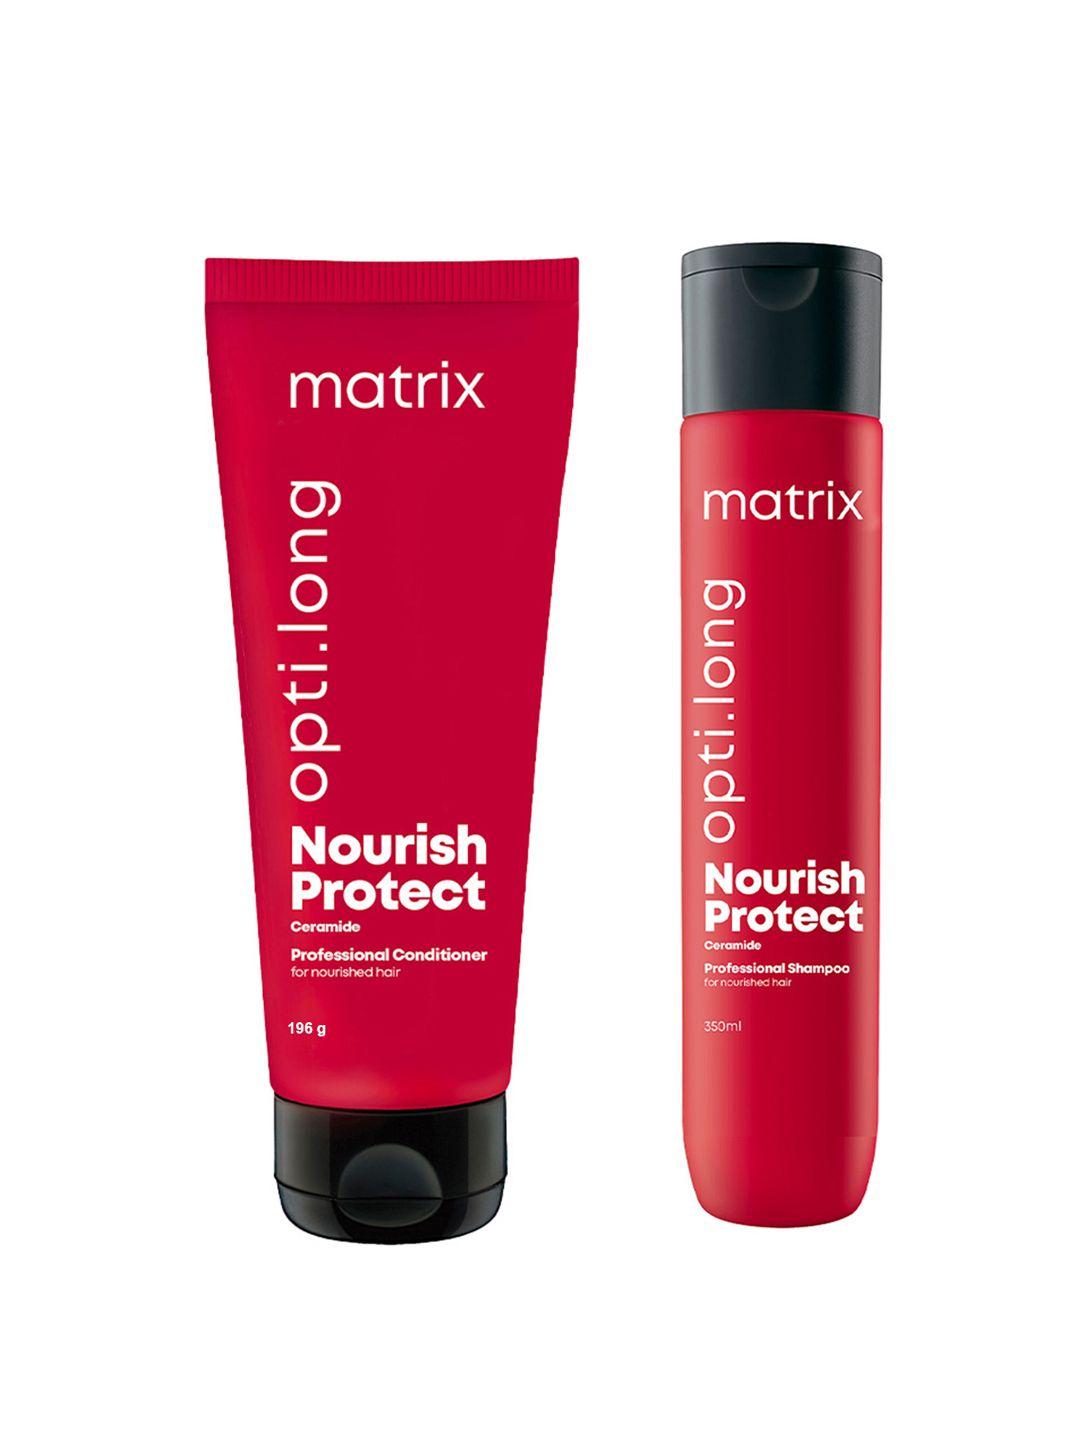 matrix set of opti long shampoo 350 ml + conditioner 196 g with ceramides for dull hair